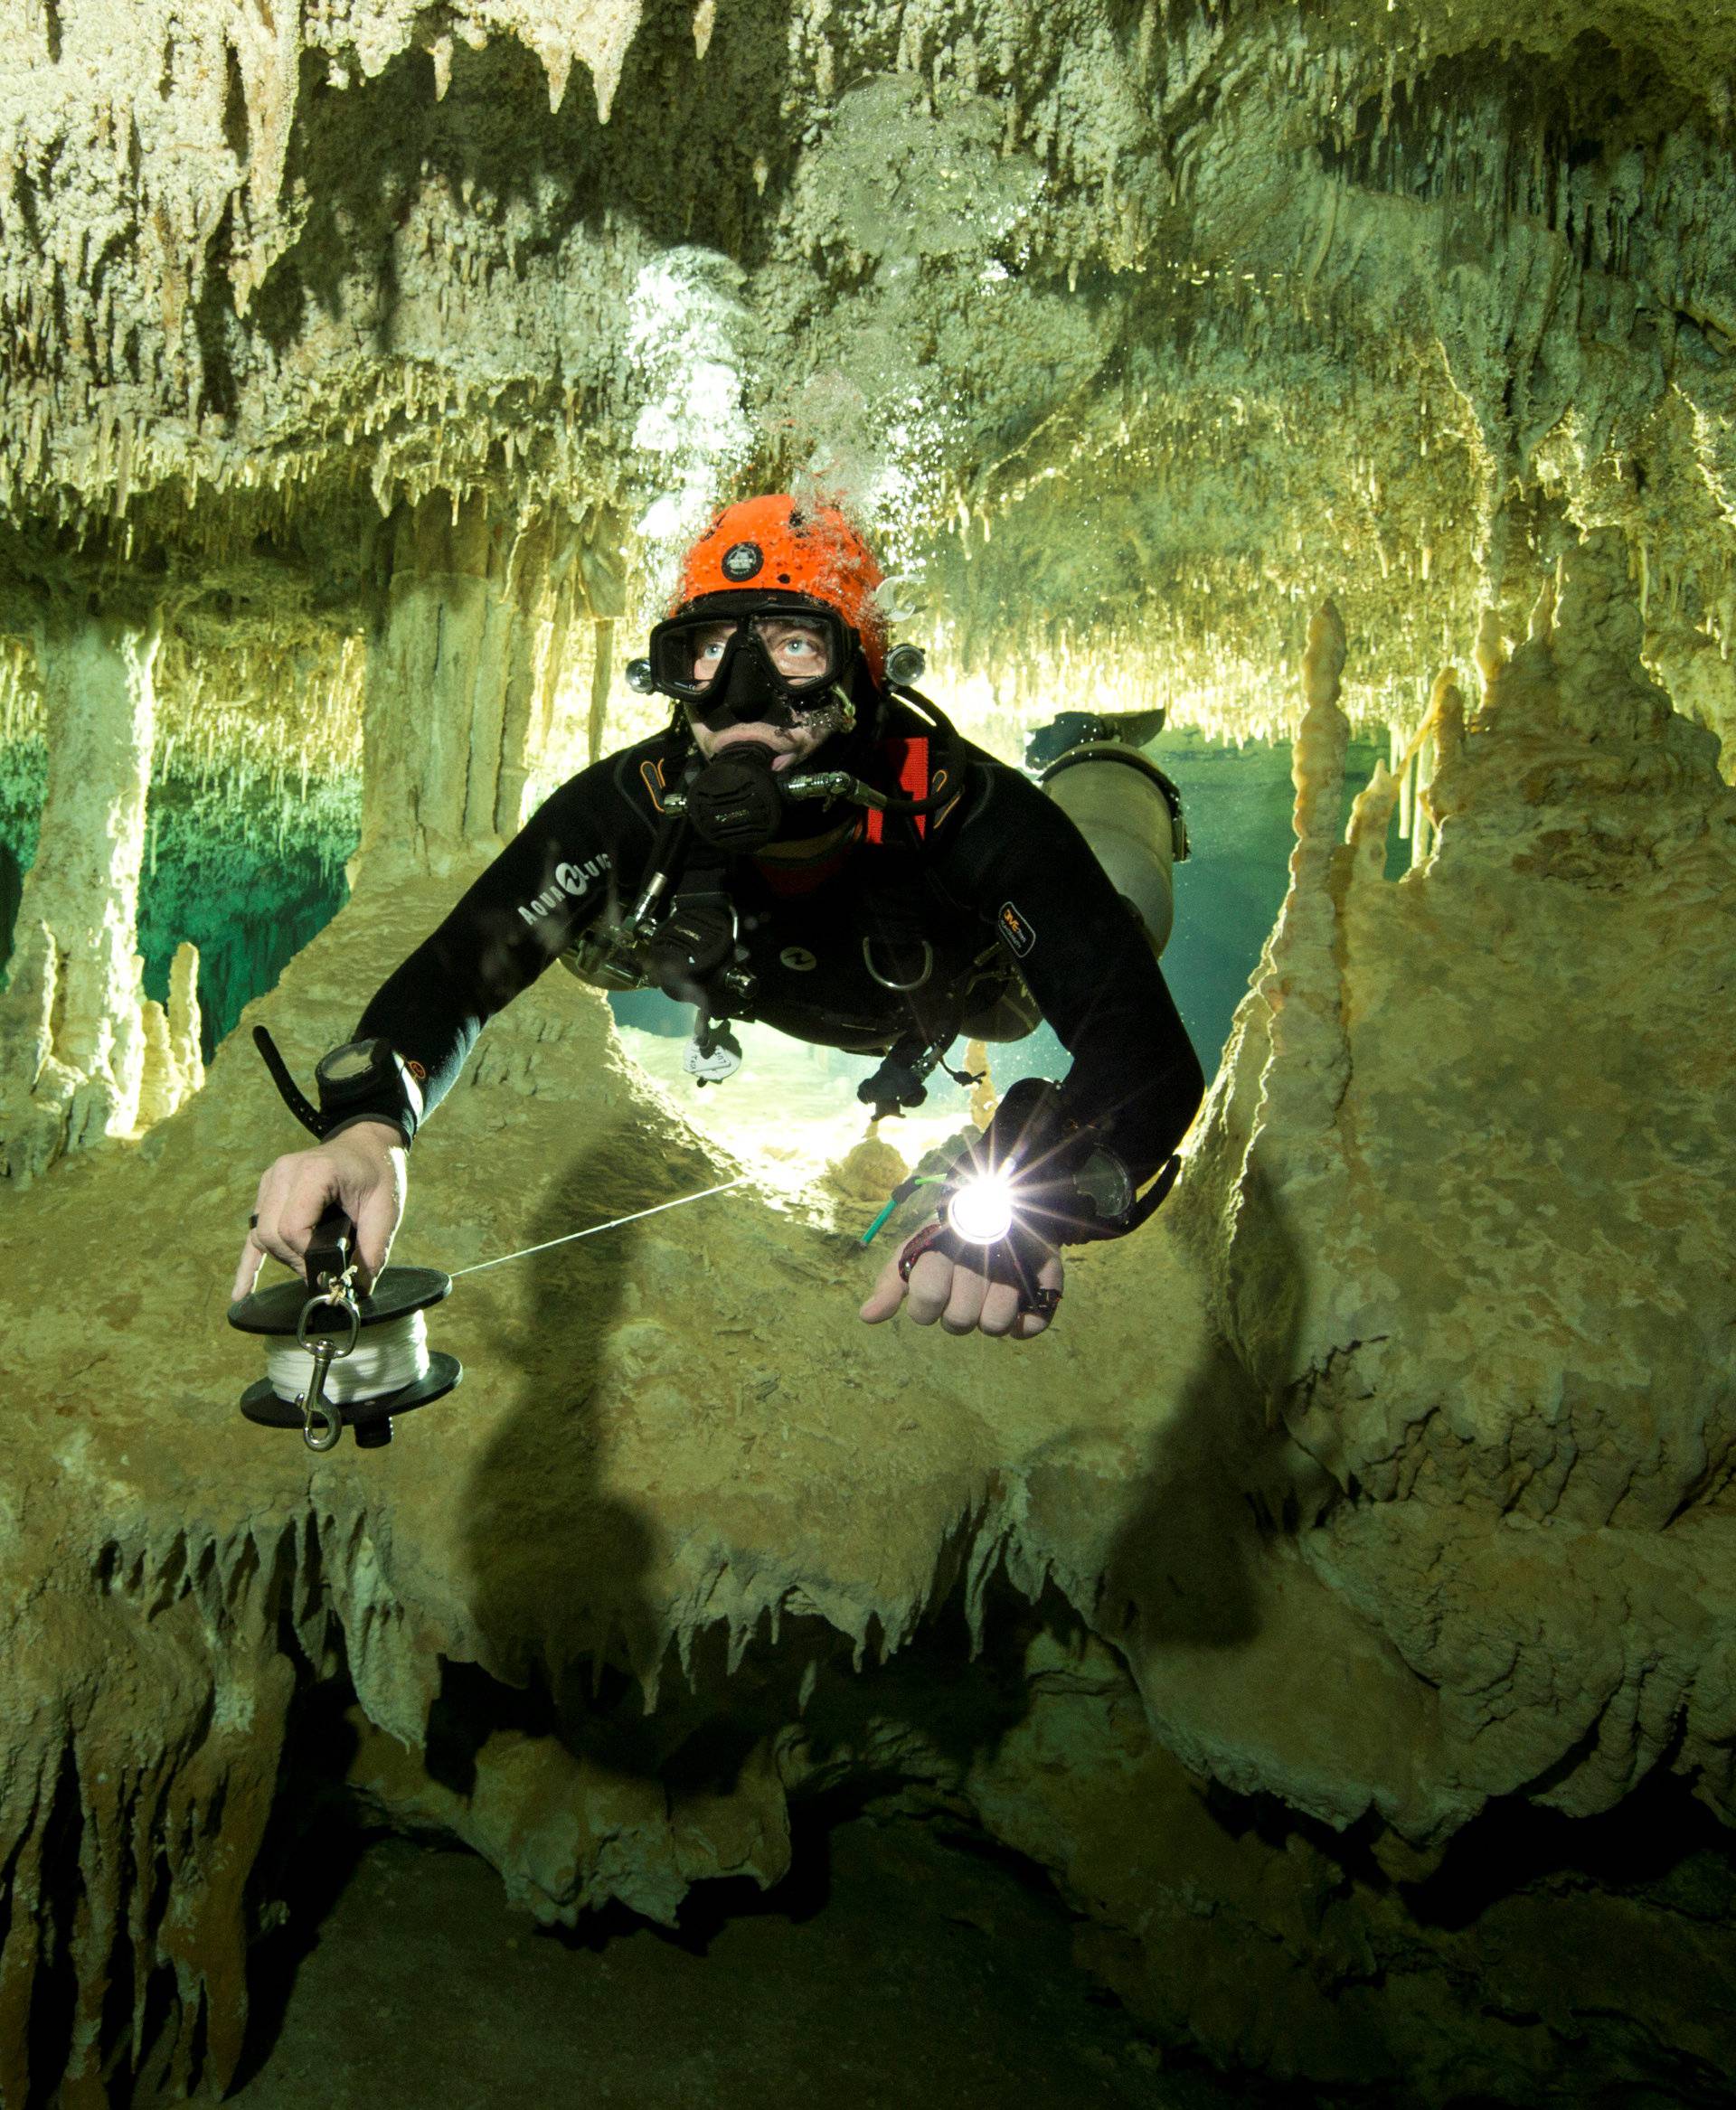 Scuba diver measures the length of Sac Aktun underwater cave system as part of the Gran Acuifero Maya Project near Tulum